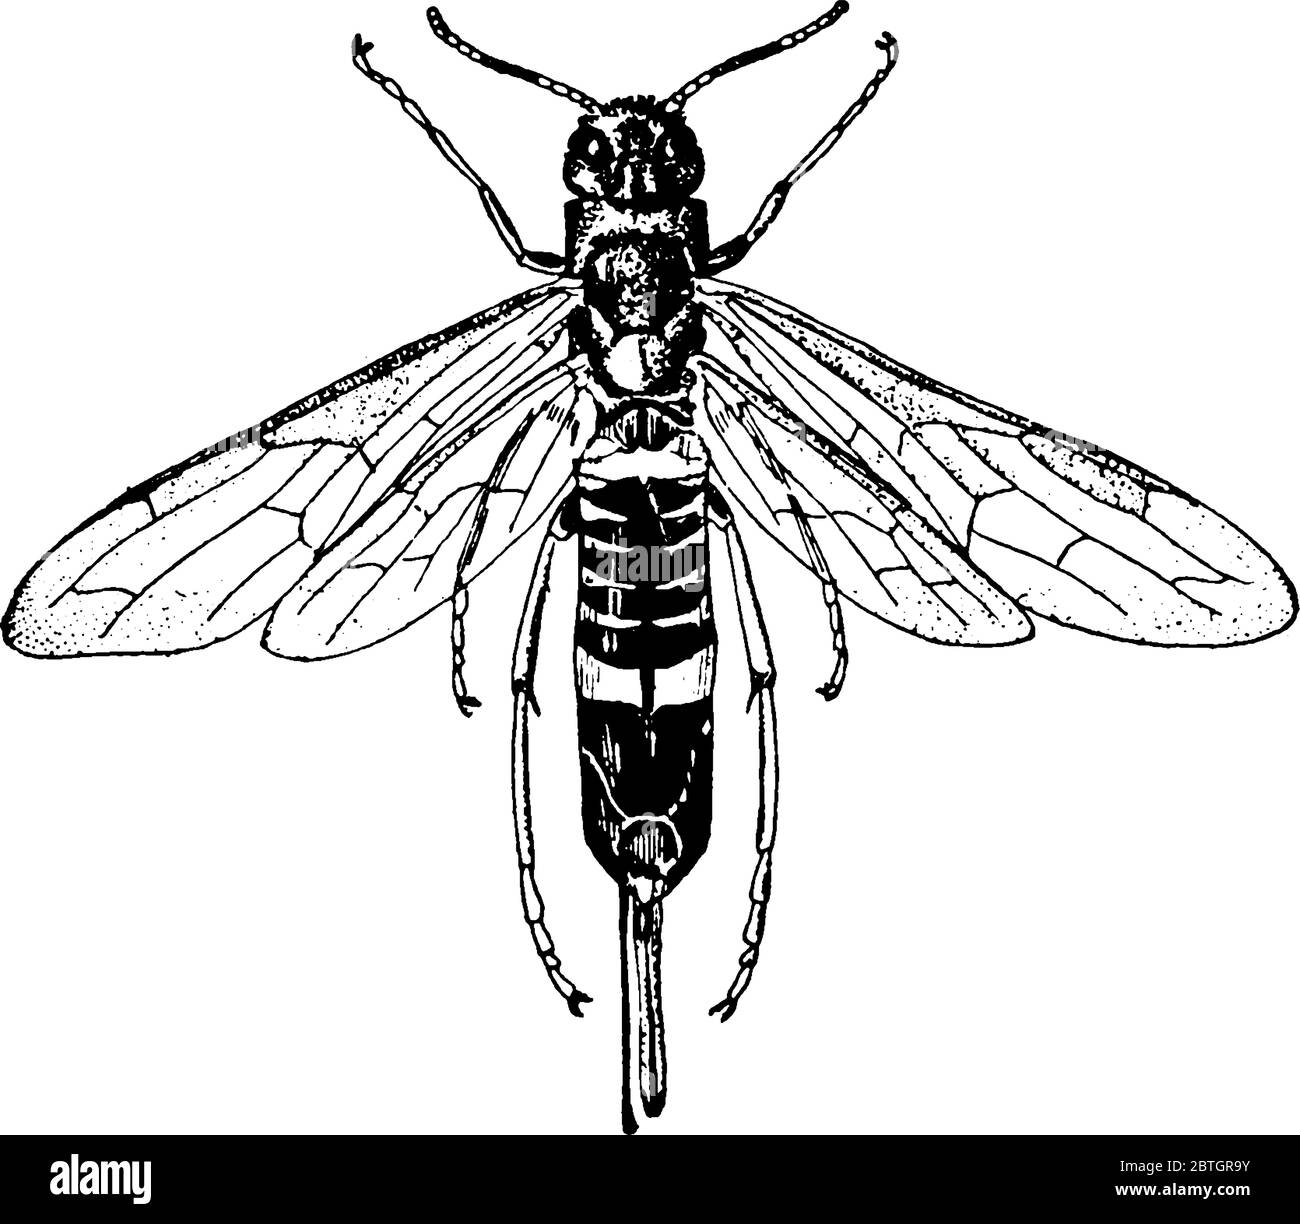 The ichneumon wasp is a parasitoid in the family Ichneumonidae, Its parasitic larvae feed on or inside another insect host species until it dies, vint Stock Vector